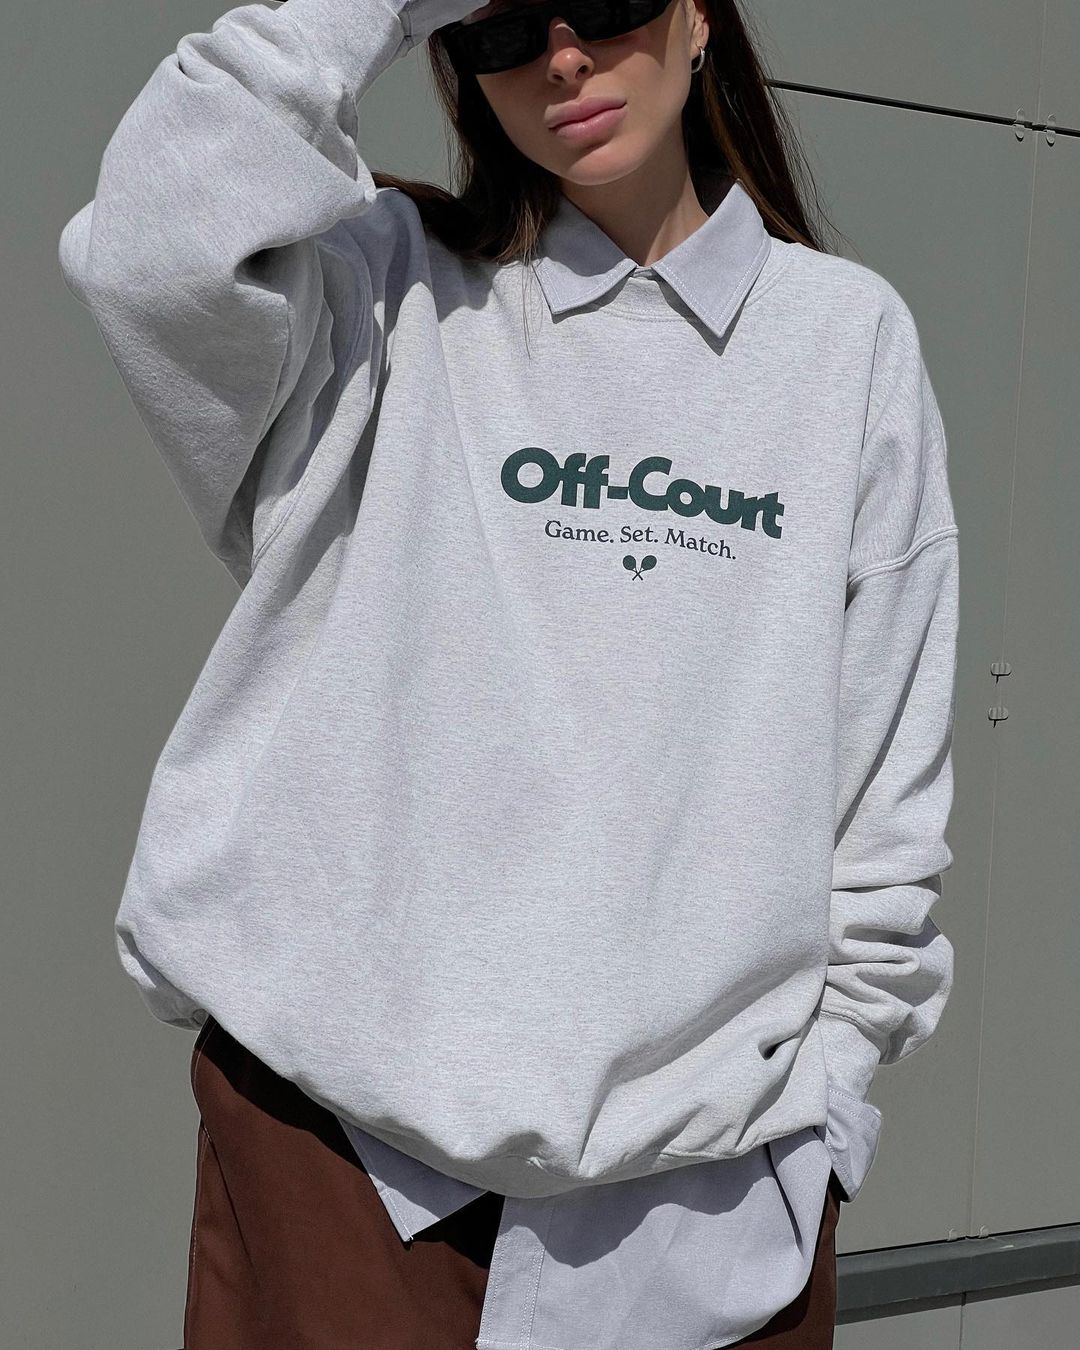 Vice 84 'Off Court GSM' Vintage Washed Sweater - Cream – UN:IK Clothing